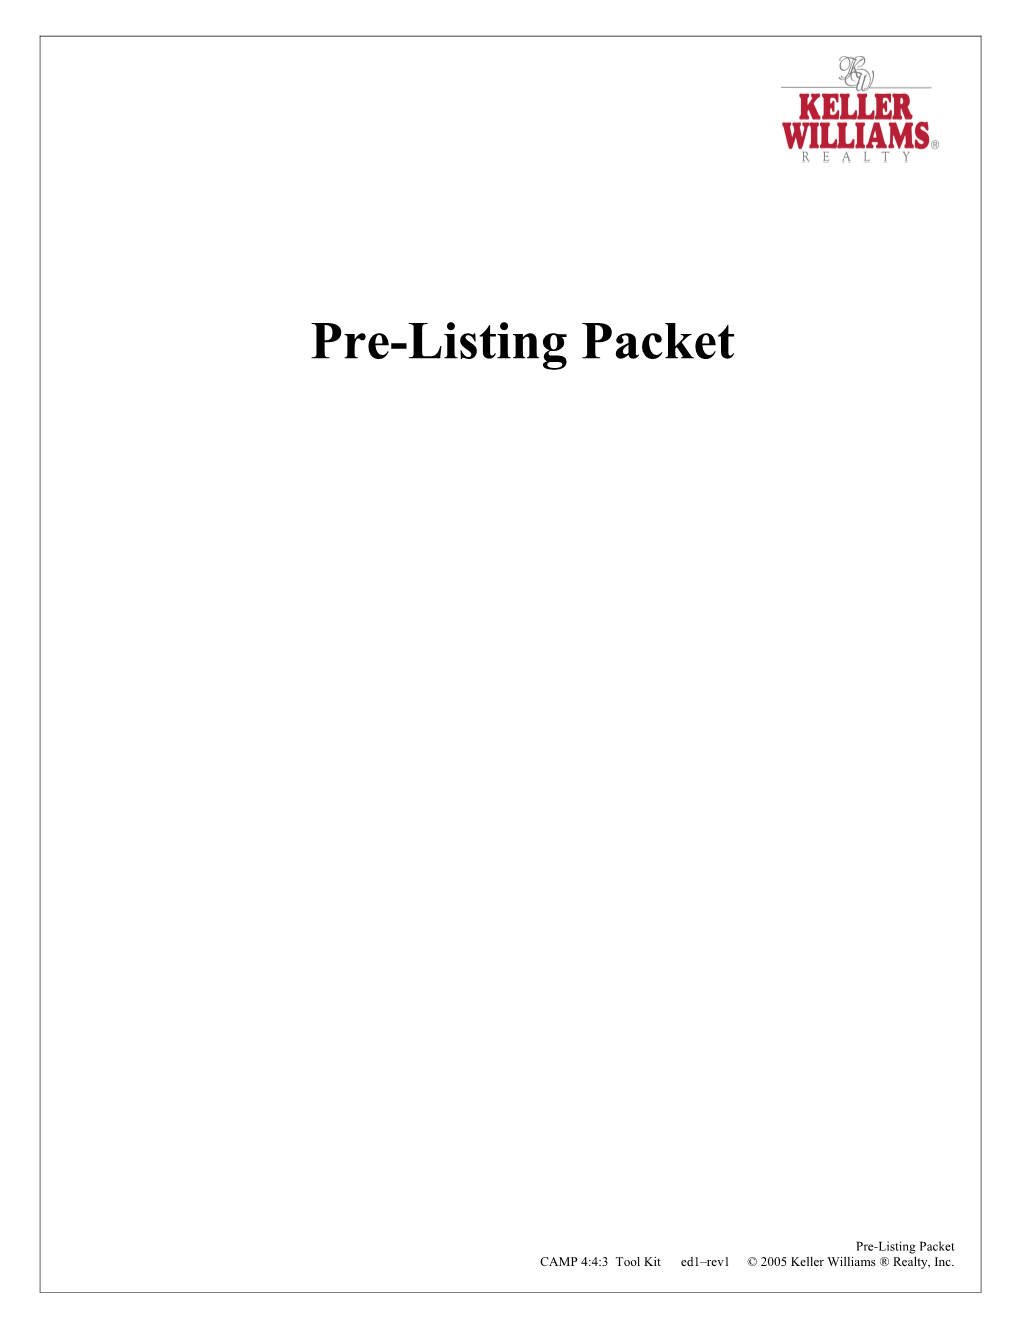 The Listing Packet